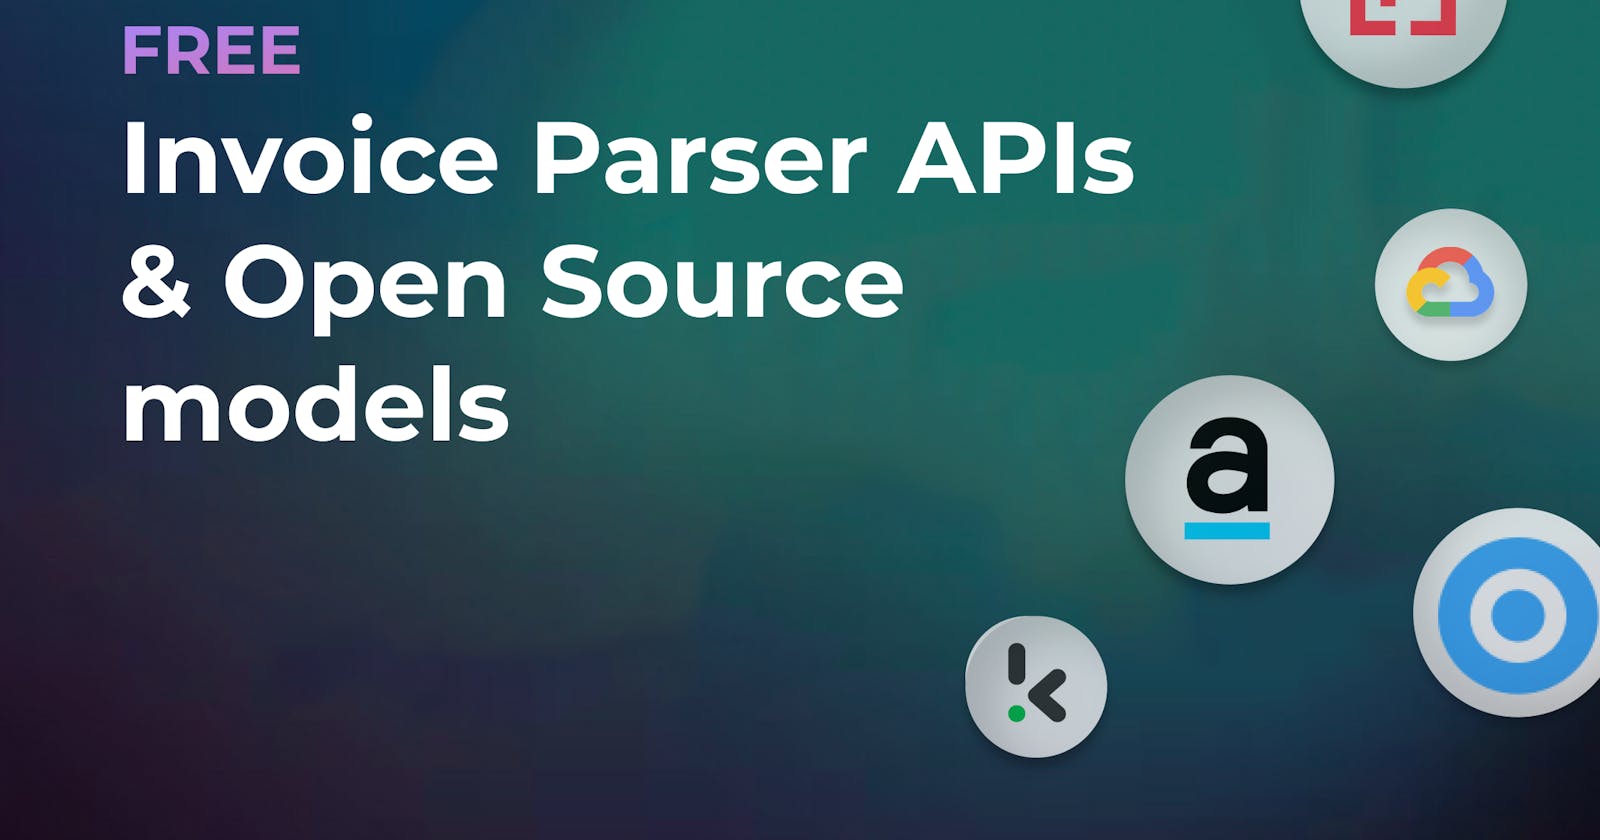 Top Free Invoice Parser tools, APIs, and Open Source models